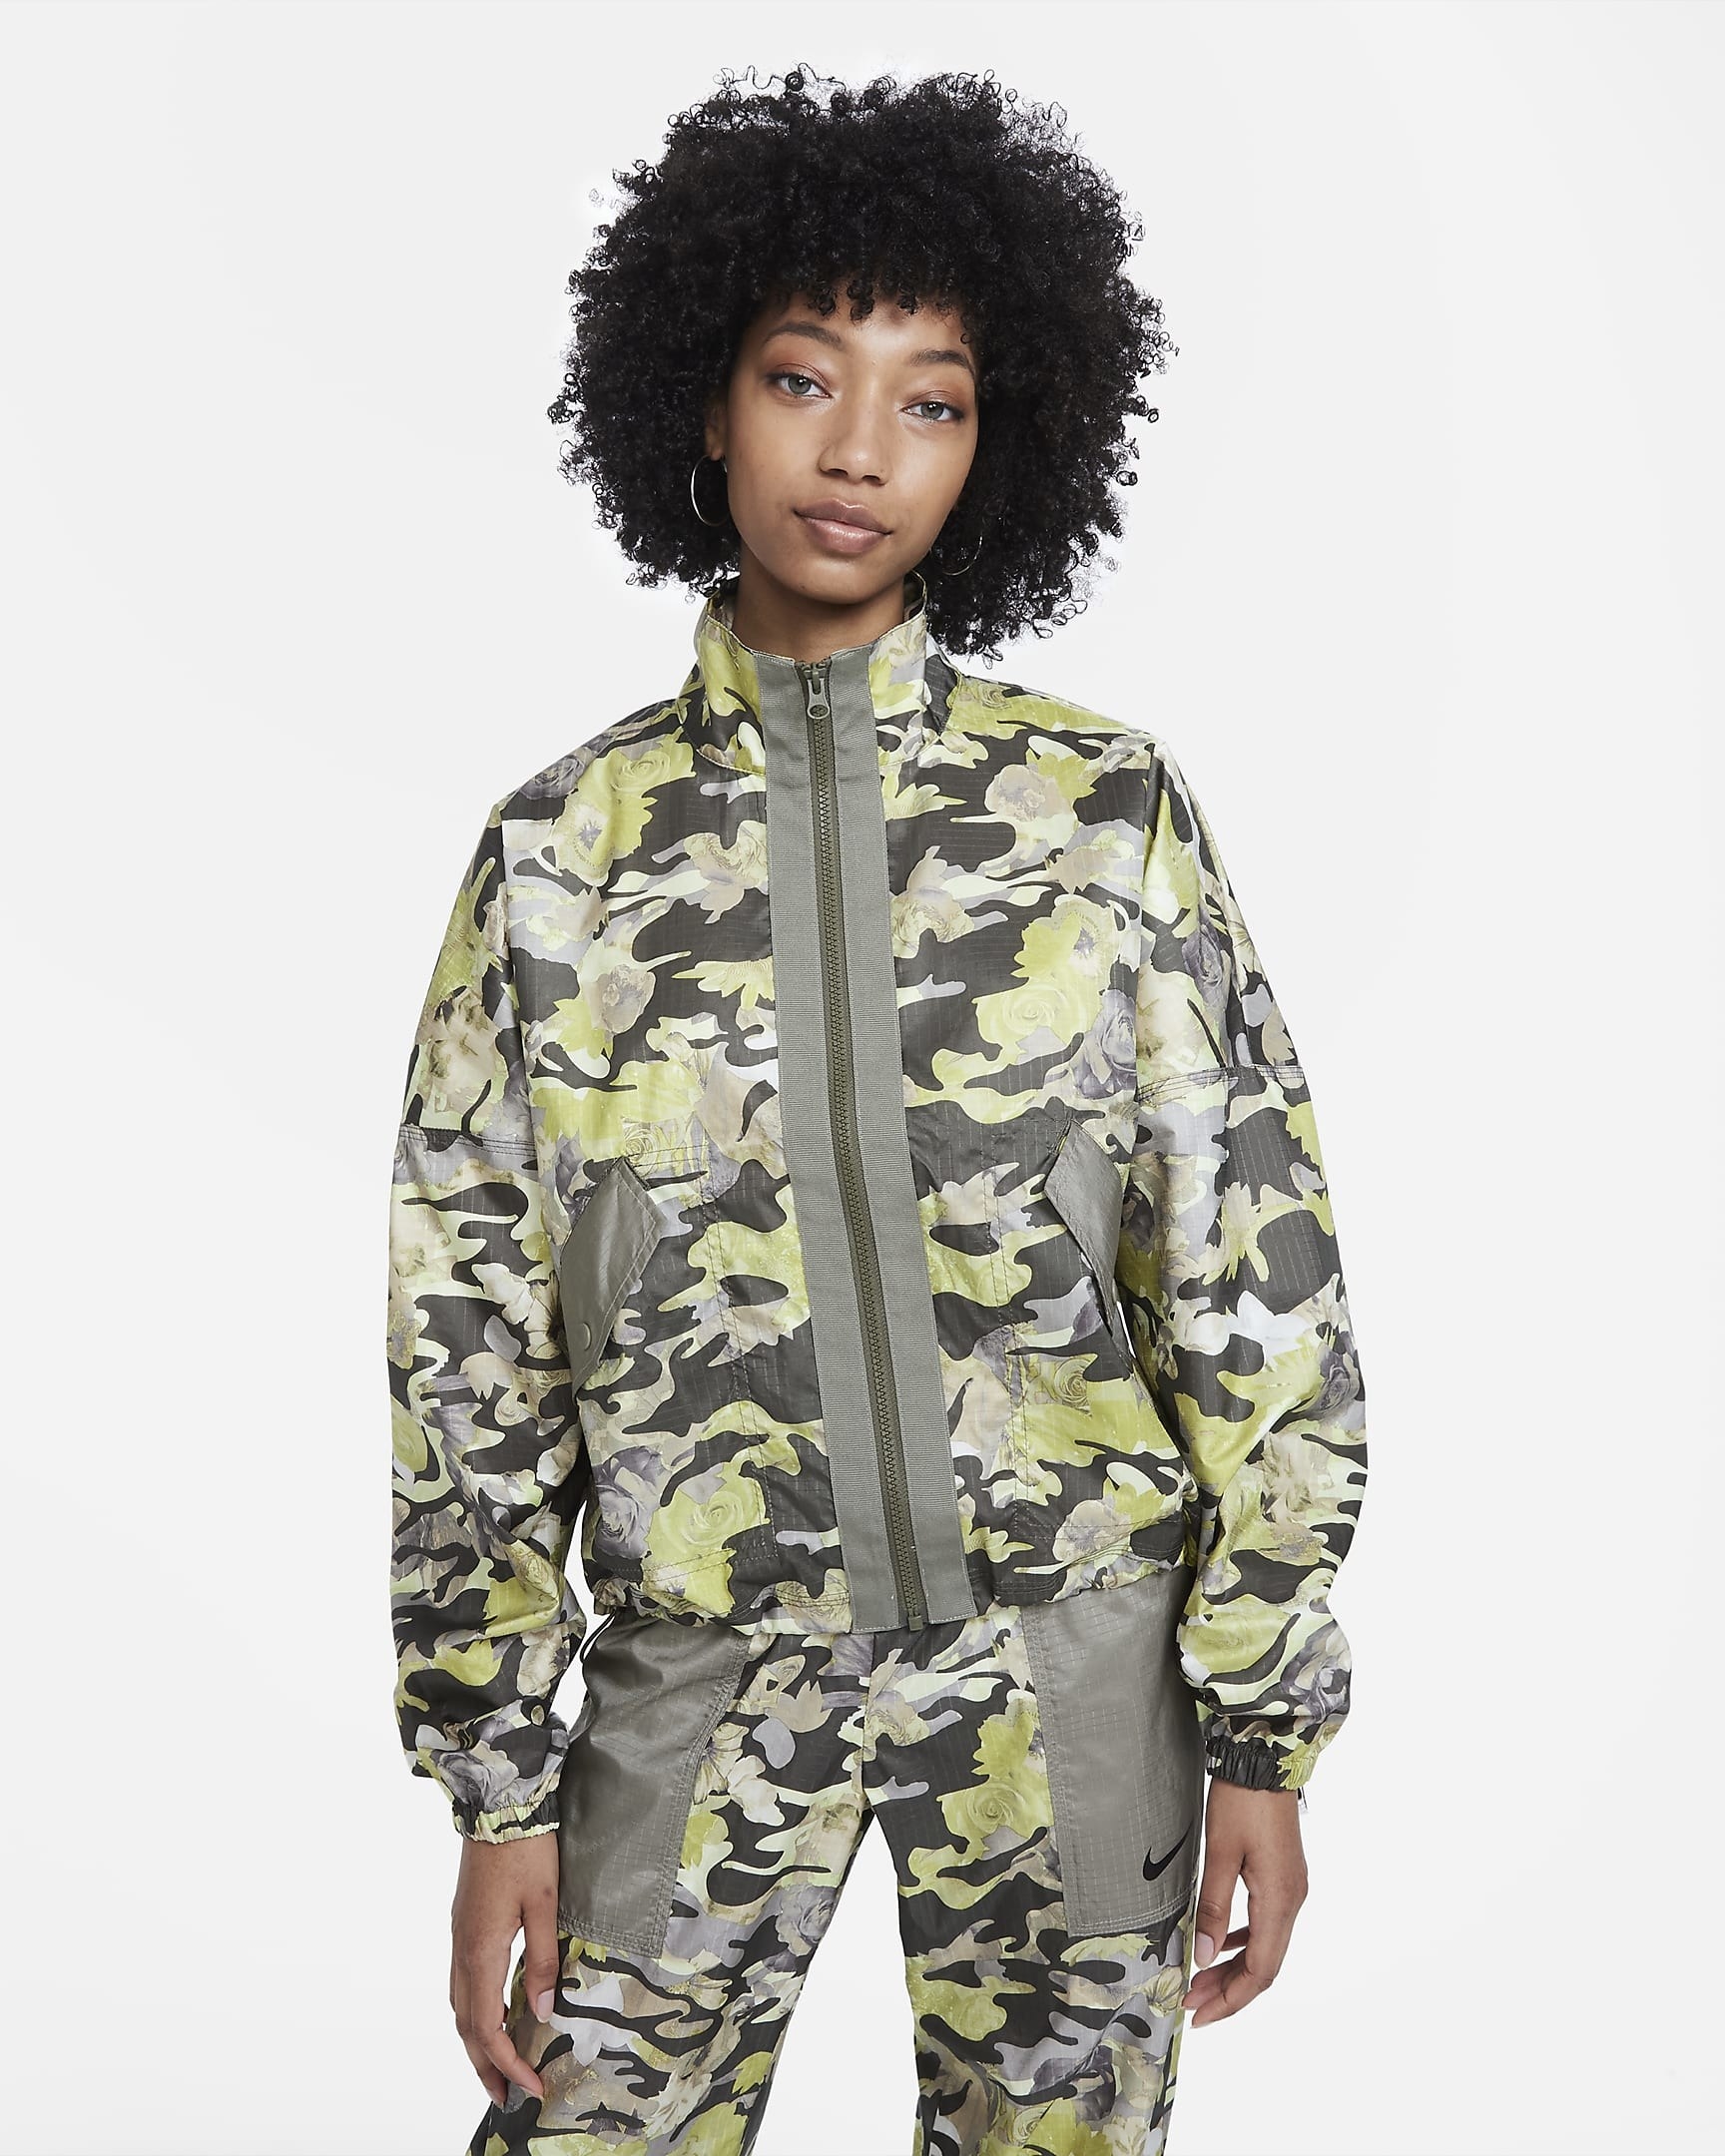 model in grey and pale green camo print zipper jacket